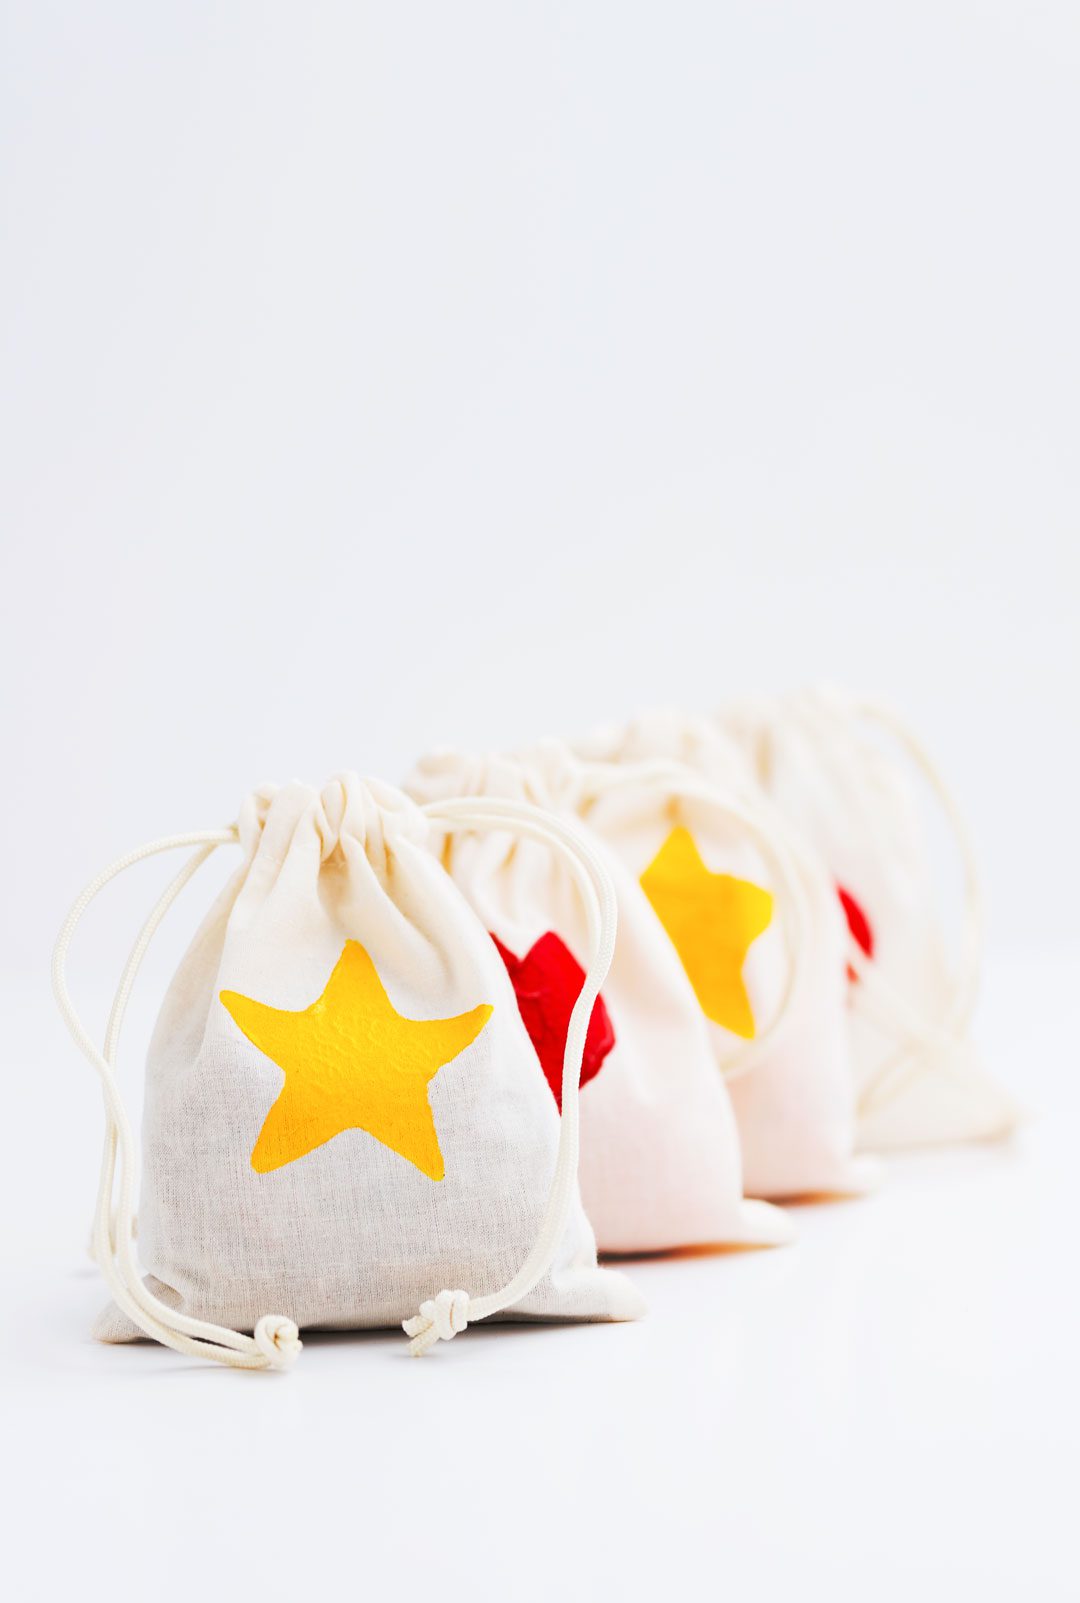 A row of drawstring bags with yellow star and red heart stamp decorations.